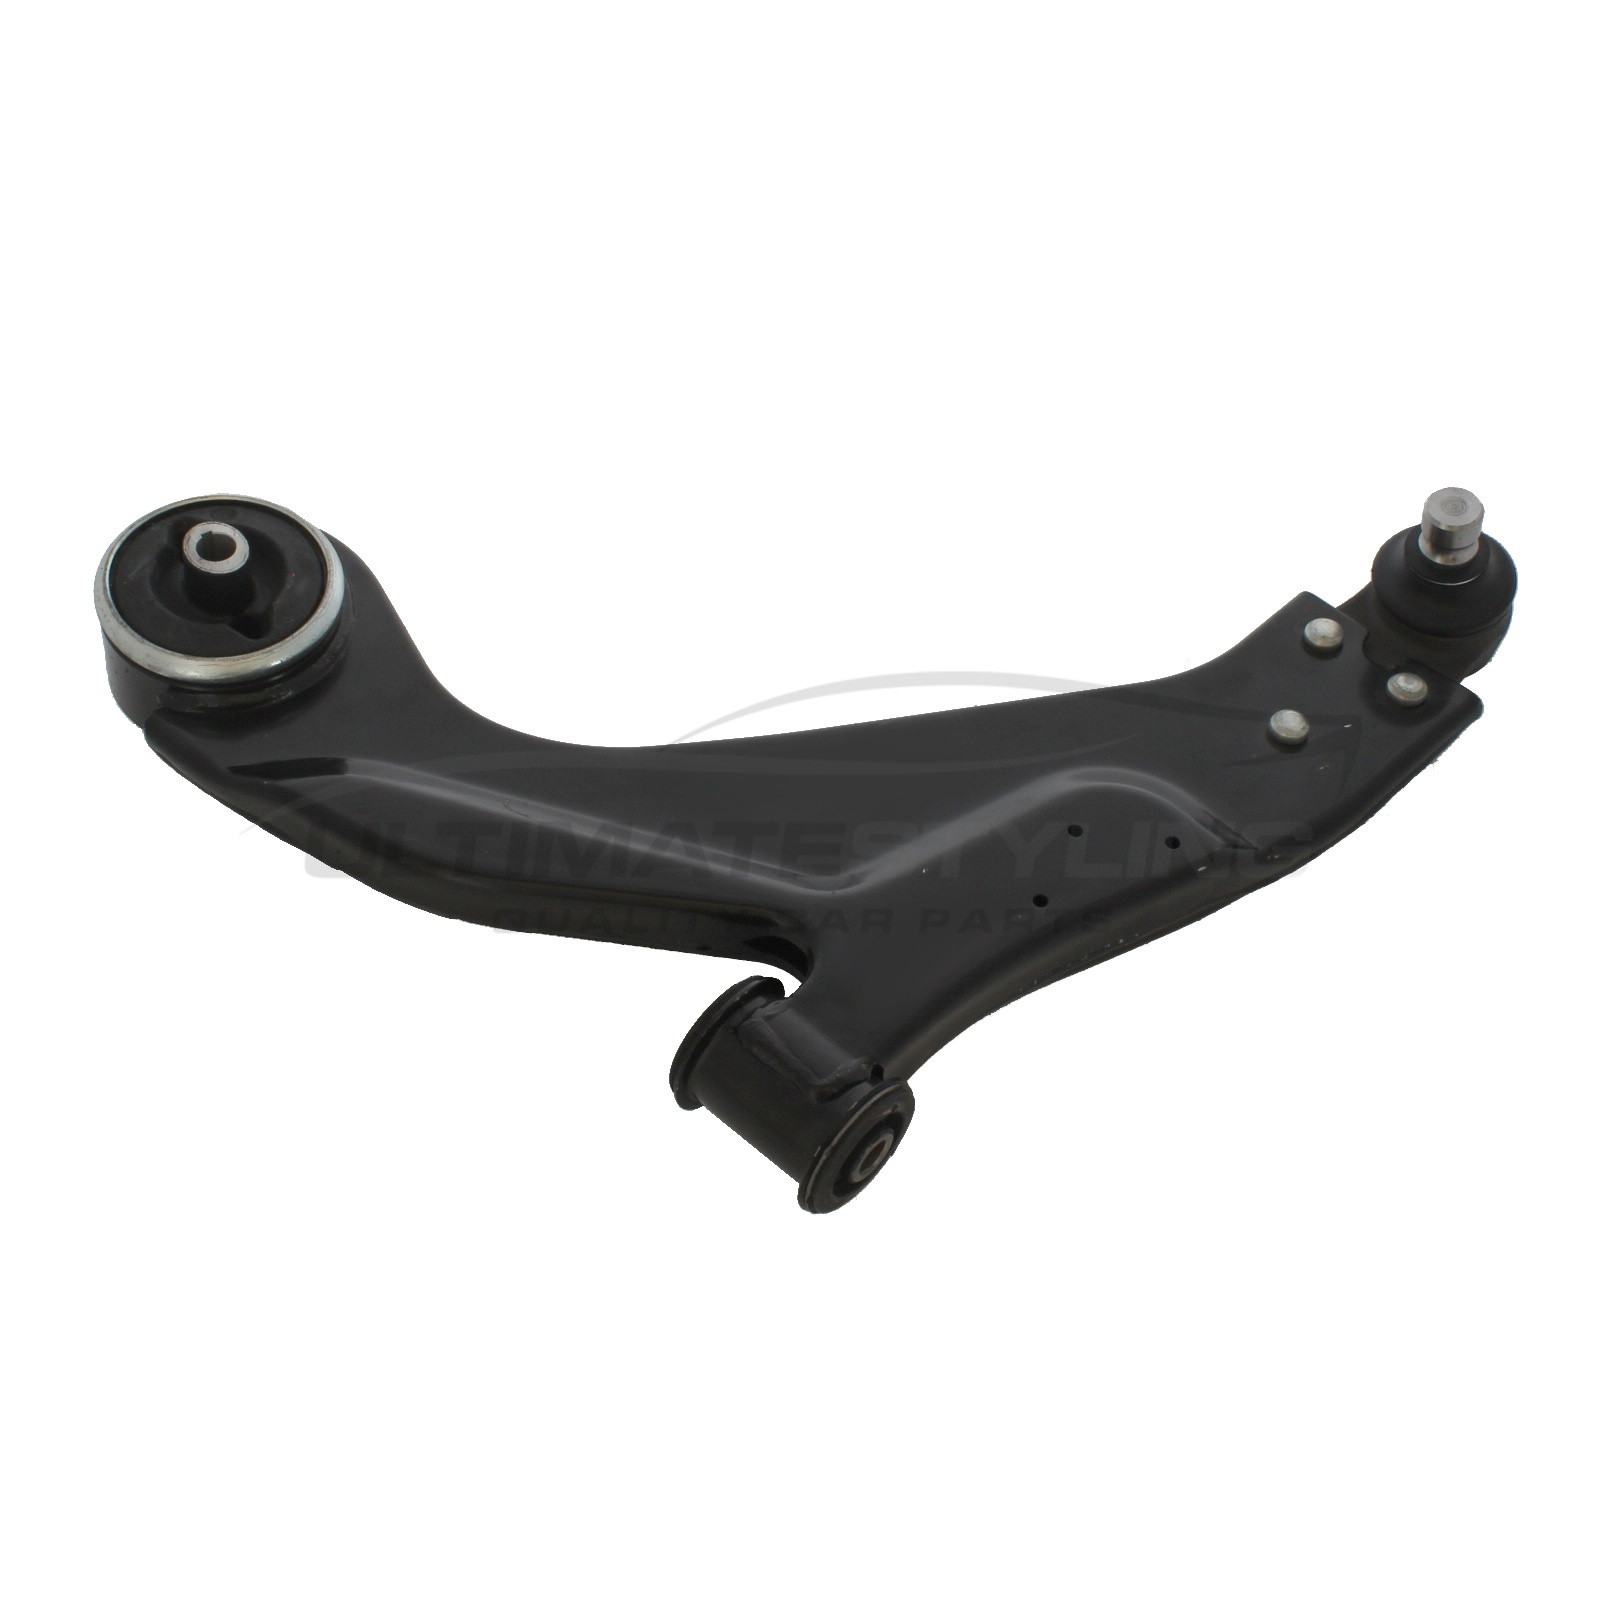 Ford Mondeo 2002-2007, Jaguar/Daimler X Type 2001-2010 Front Lower Suspension Arm (Steel) Including Ball Joint and Rear Bush Passenger Side (LH)